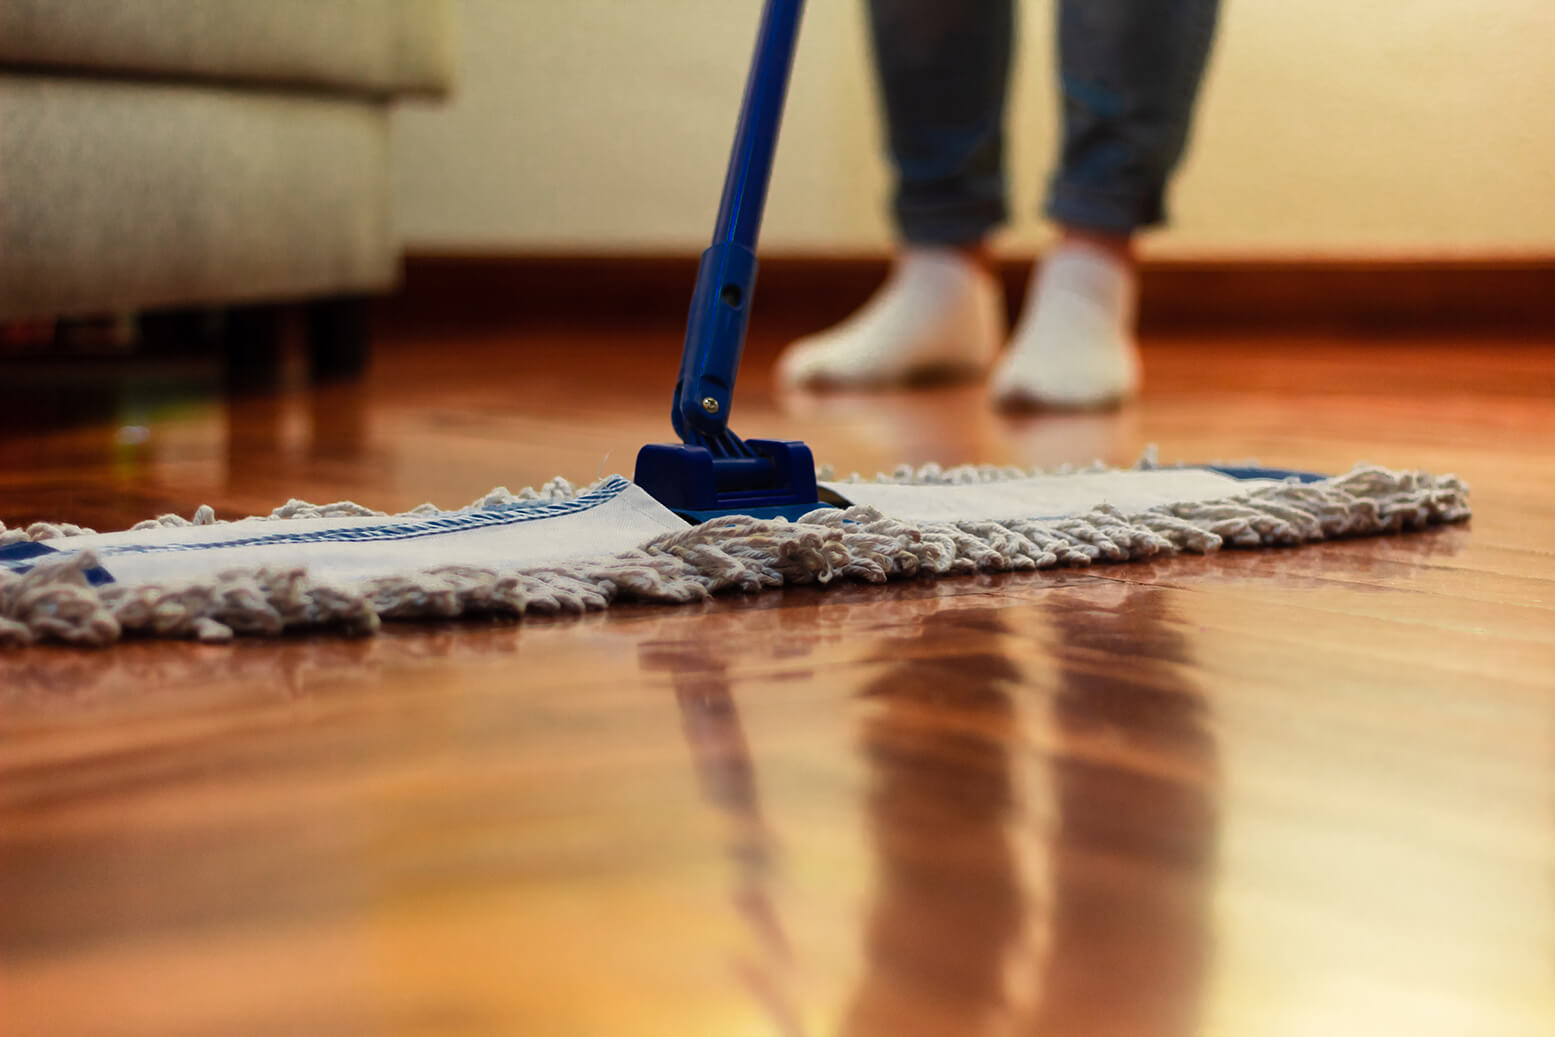 A large professional mop positioned on a hardwood floor